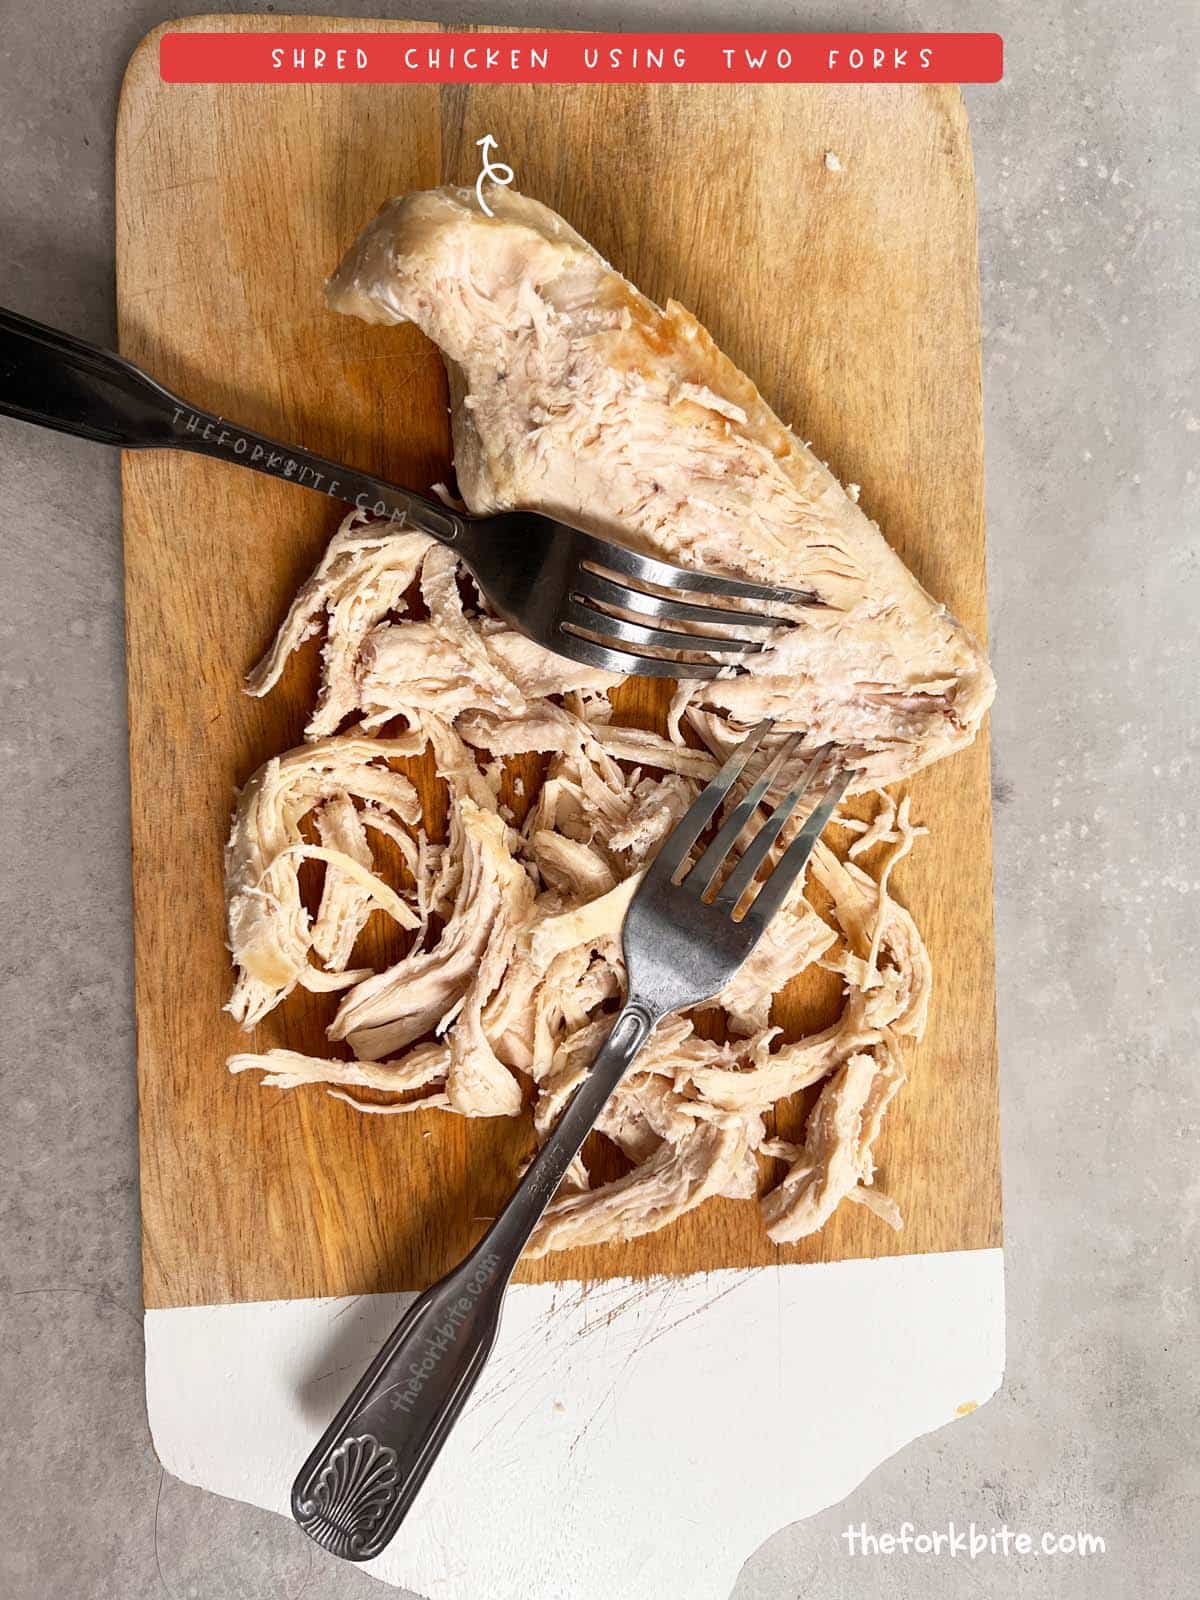 Place the cooked chicken on a cutting board and use the two forks to pull the meat apart in opposite directions. This method works well for shredded chicken used in salads, tacos, or other dishes where small pieces are desired.